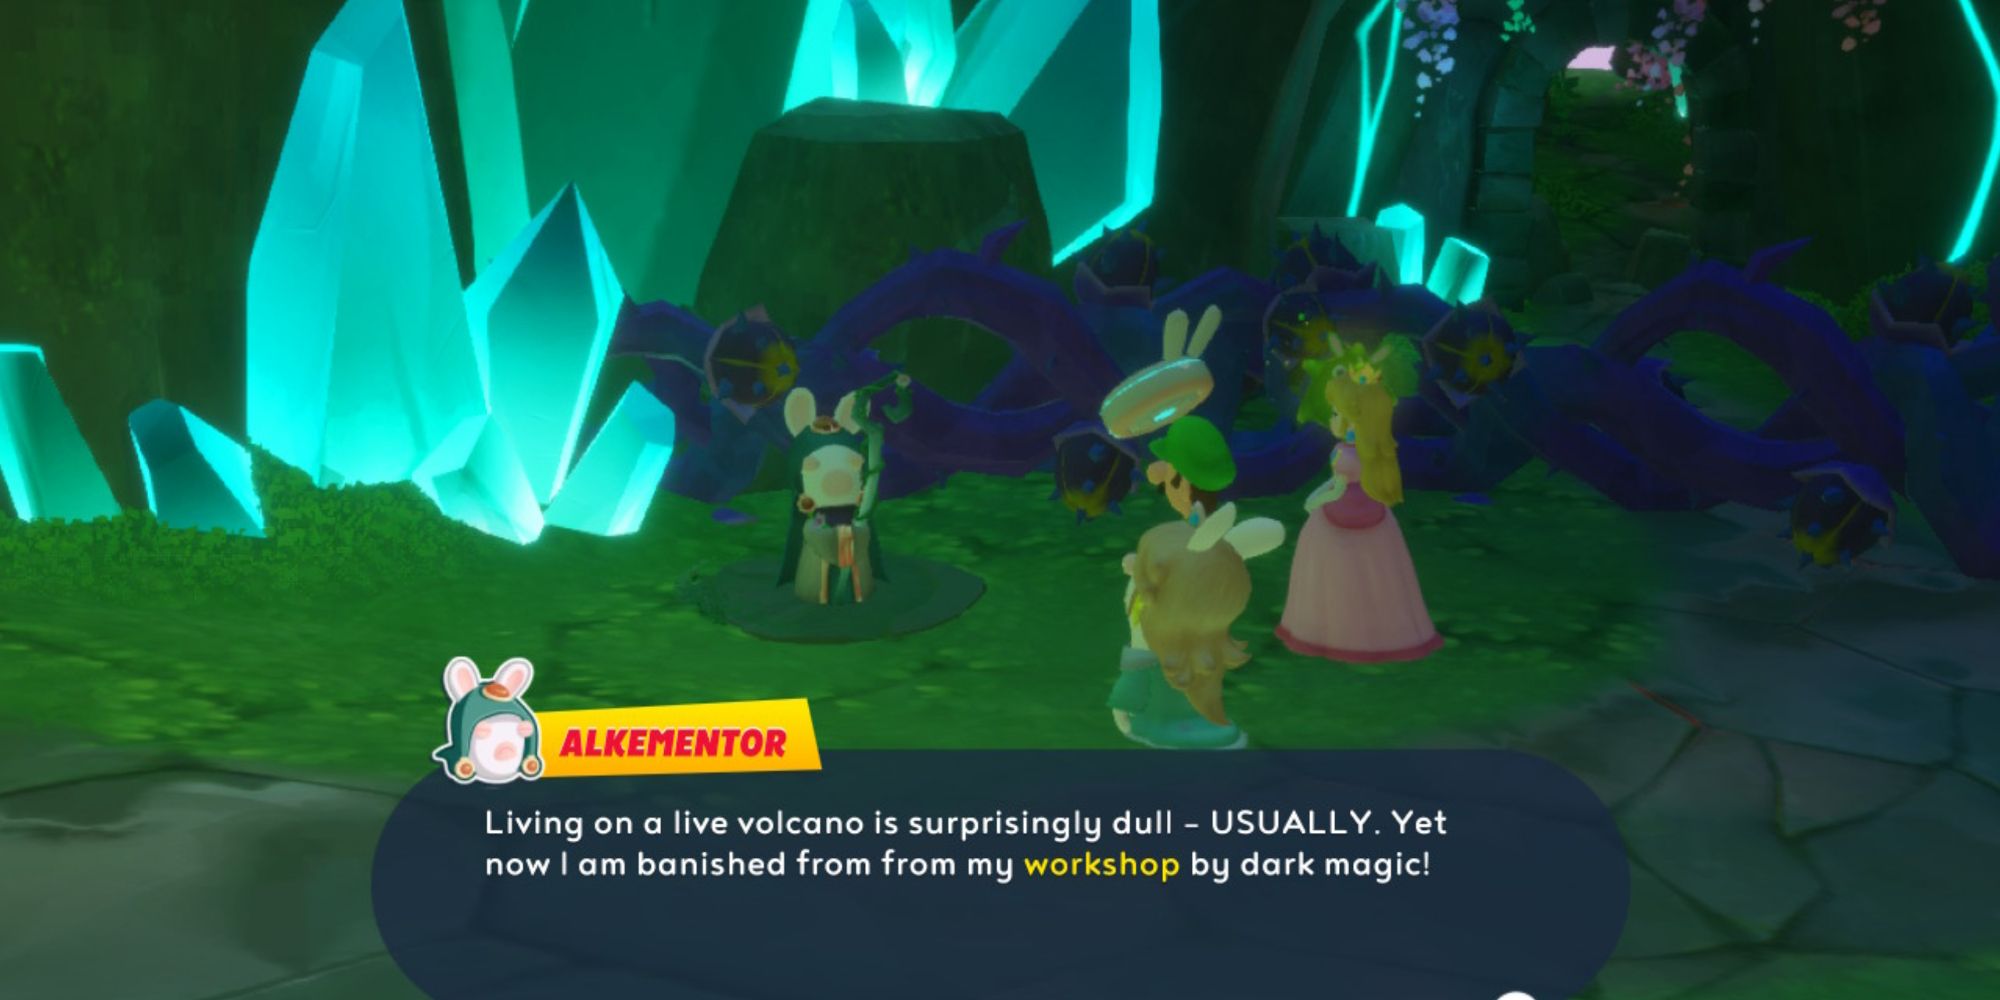 Mario Rabbids Sparks of Hope Wizard Alkementor Dialogue with Party